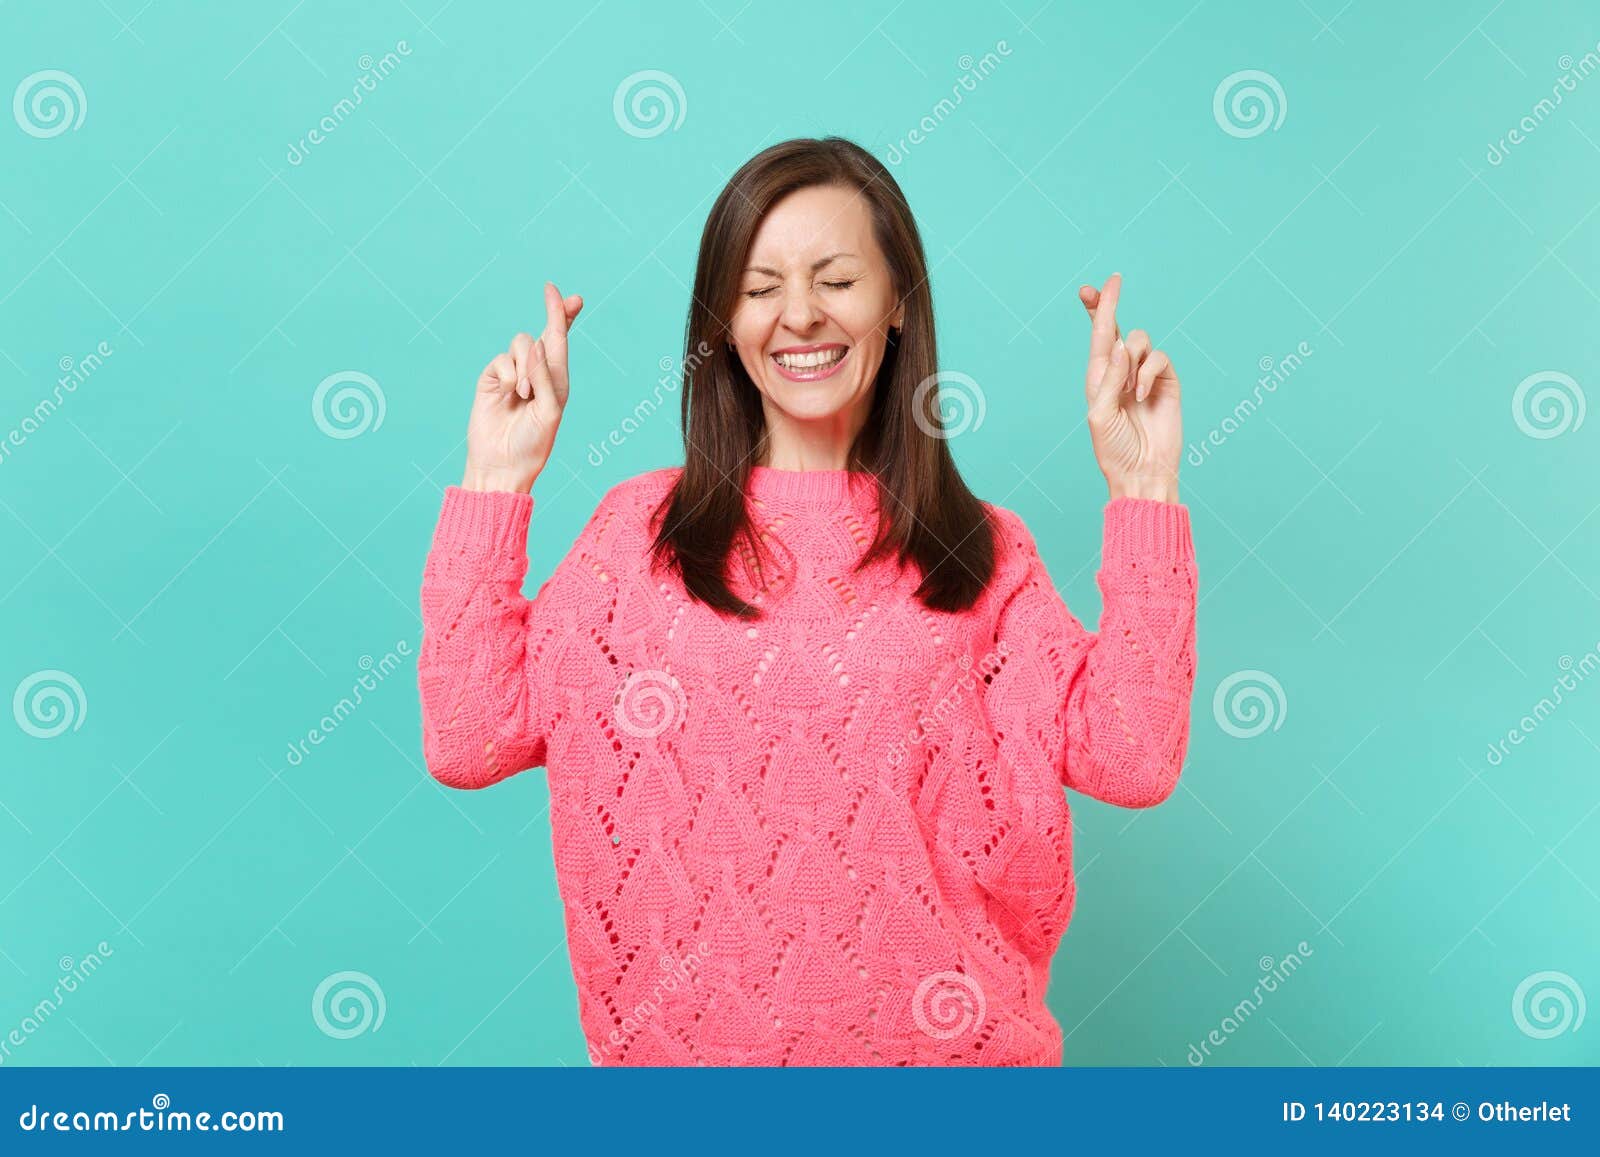 Cute Young Woman in Knitted Pink Sweater Keeping Fingers Crossed Eyes ...